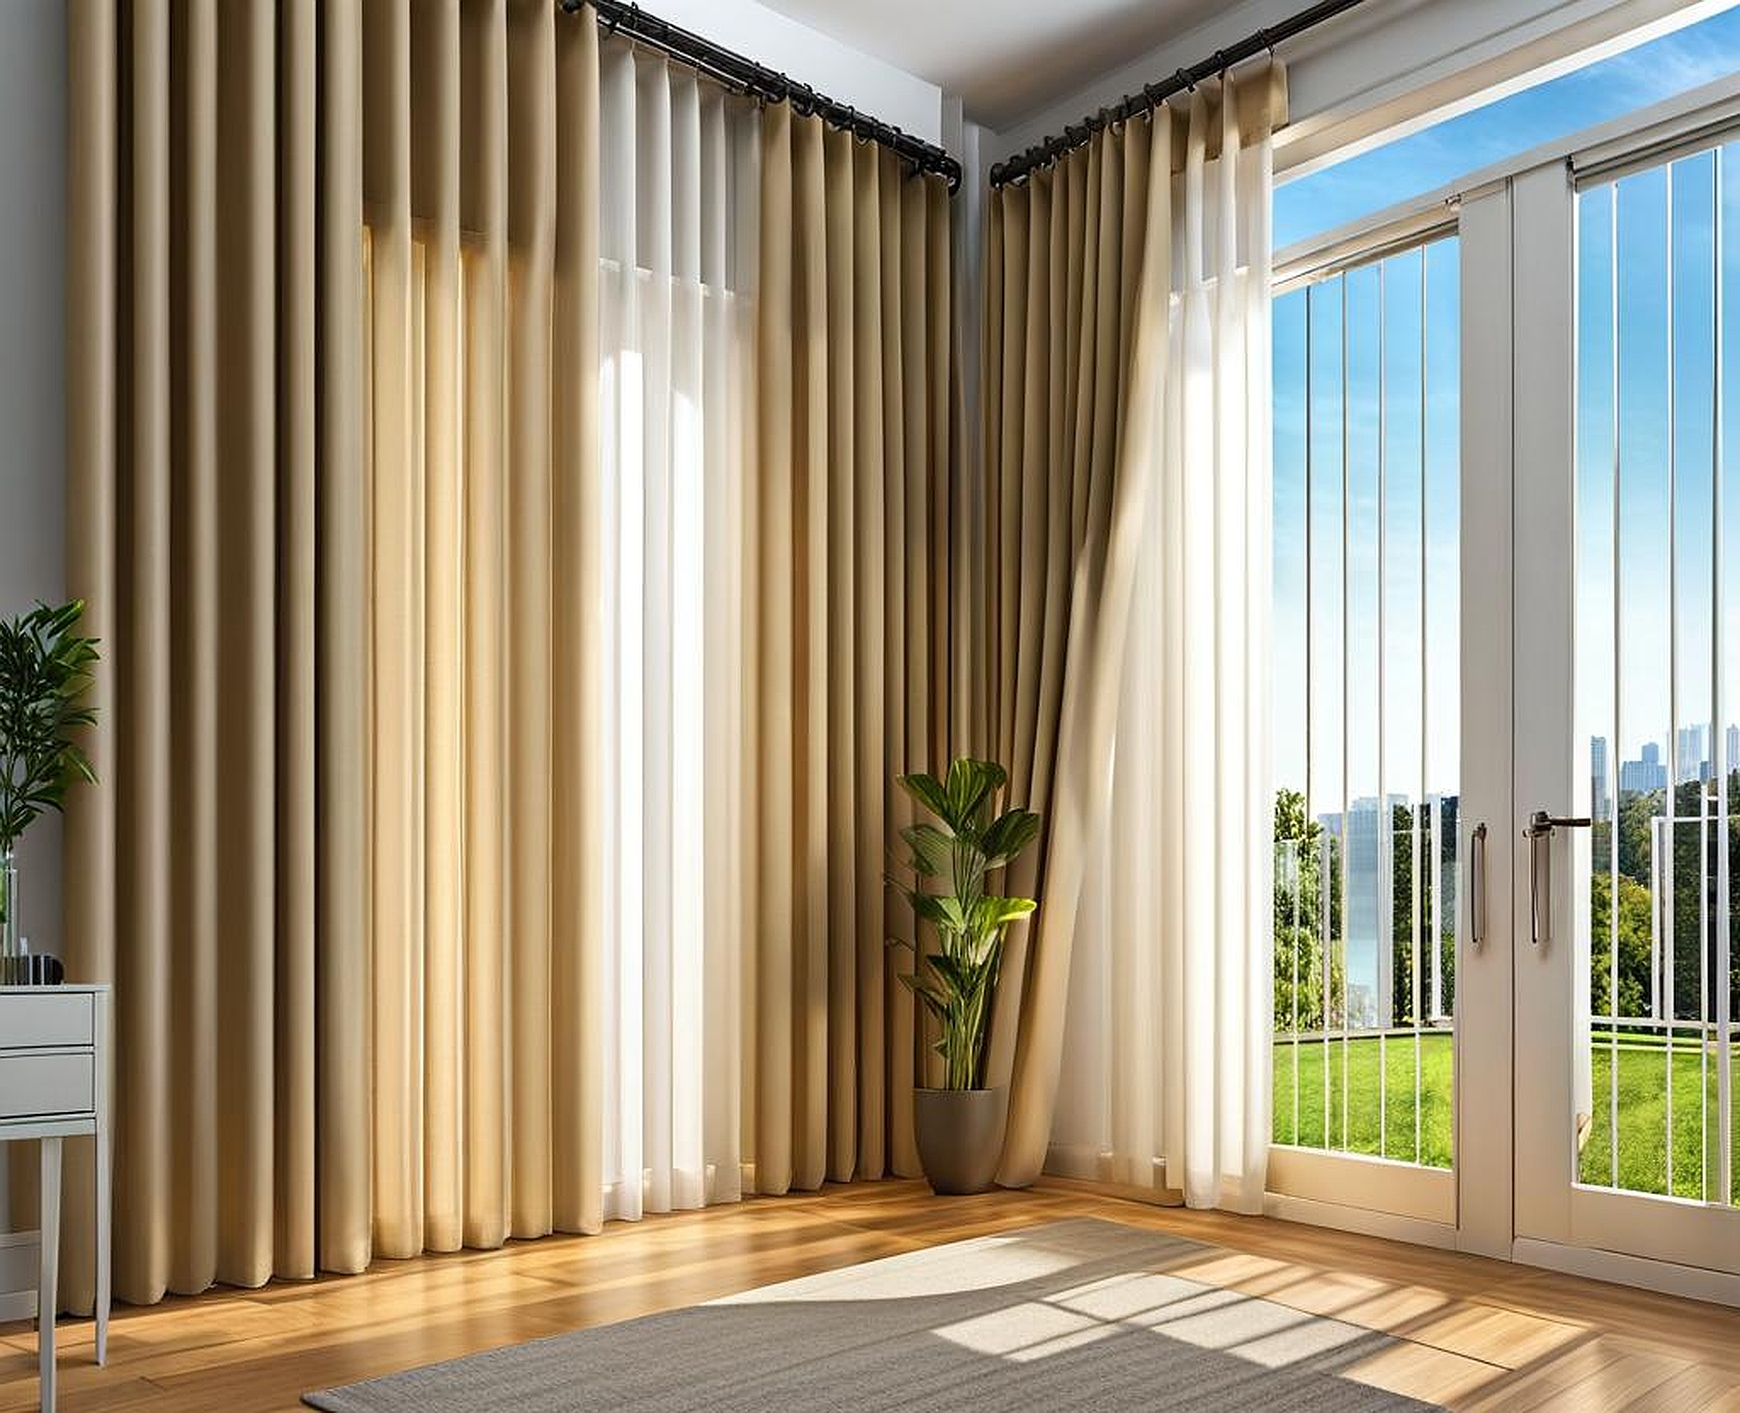 curtains over horizontal blinds